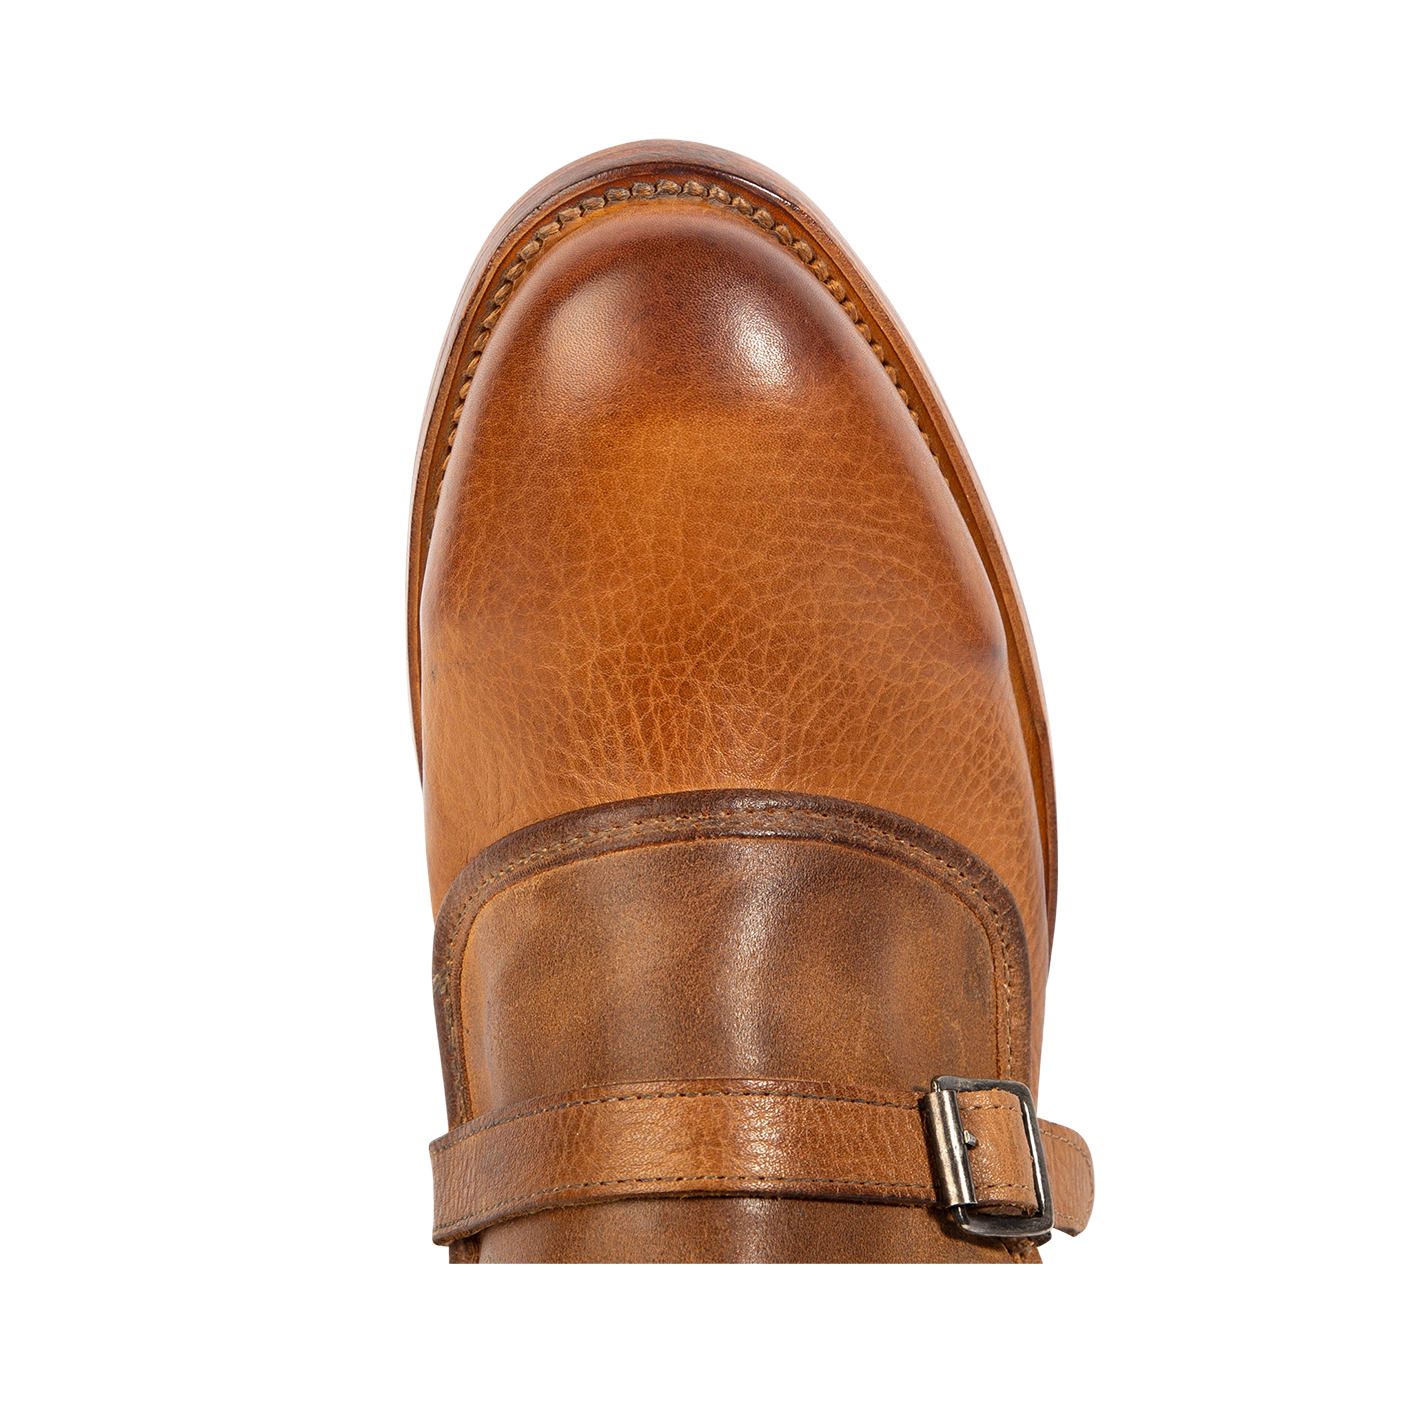 Top view showing round toe with leather/suede upper on FREEBIRD men's Pantera tan boot